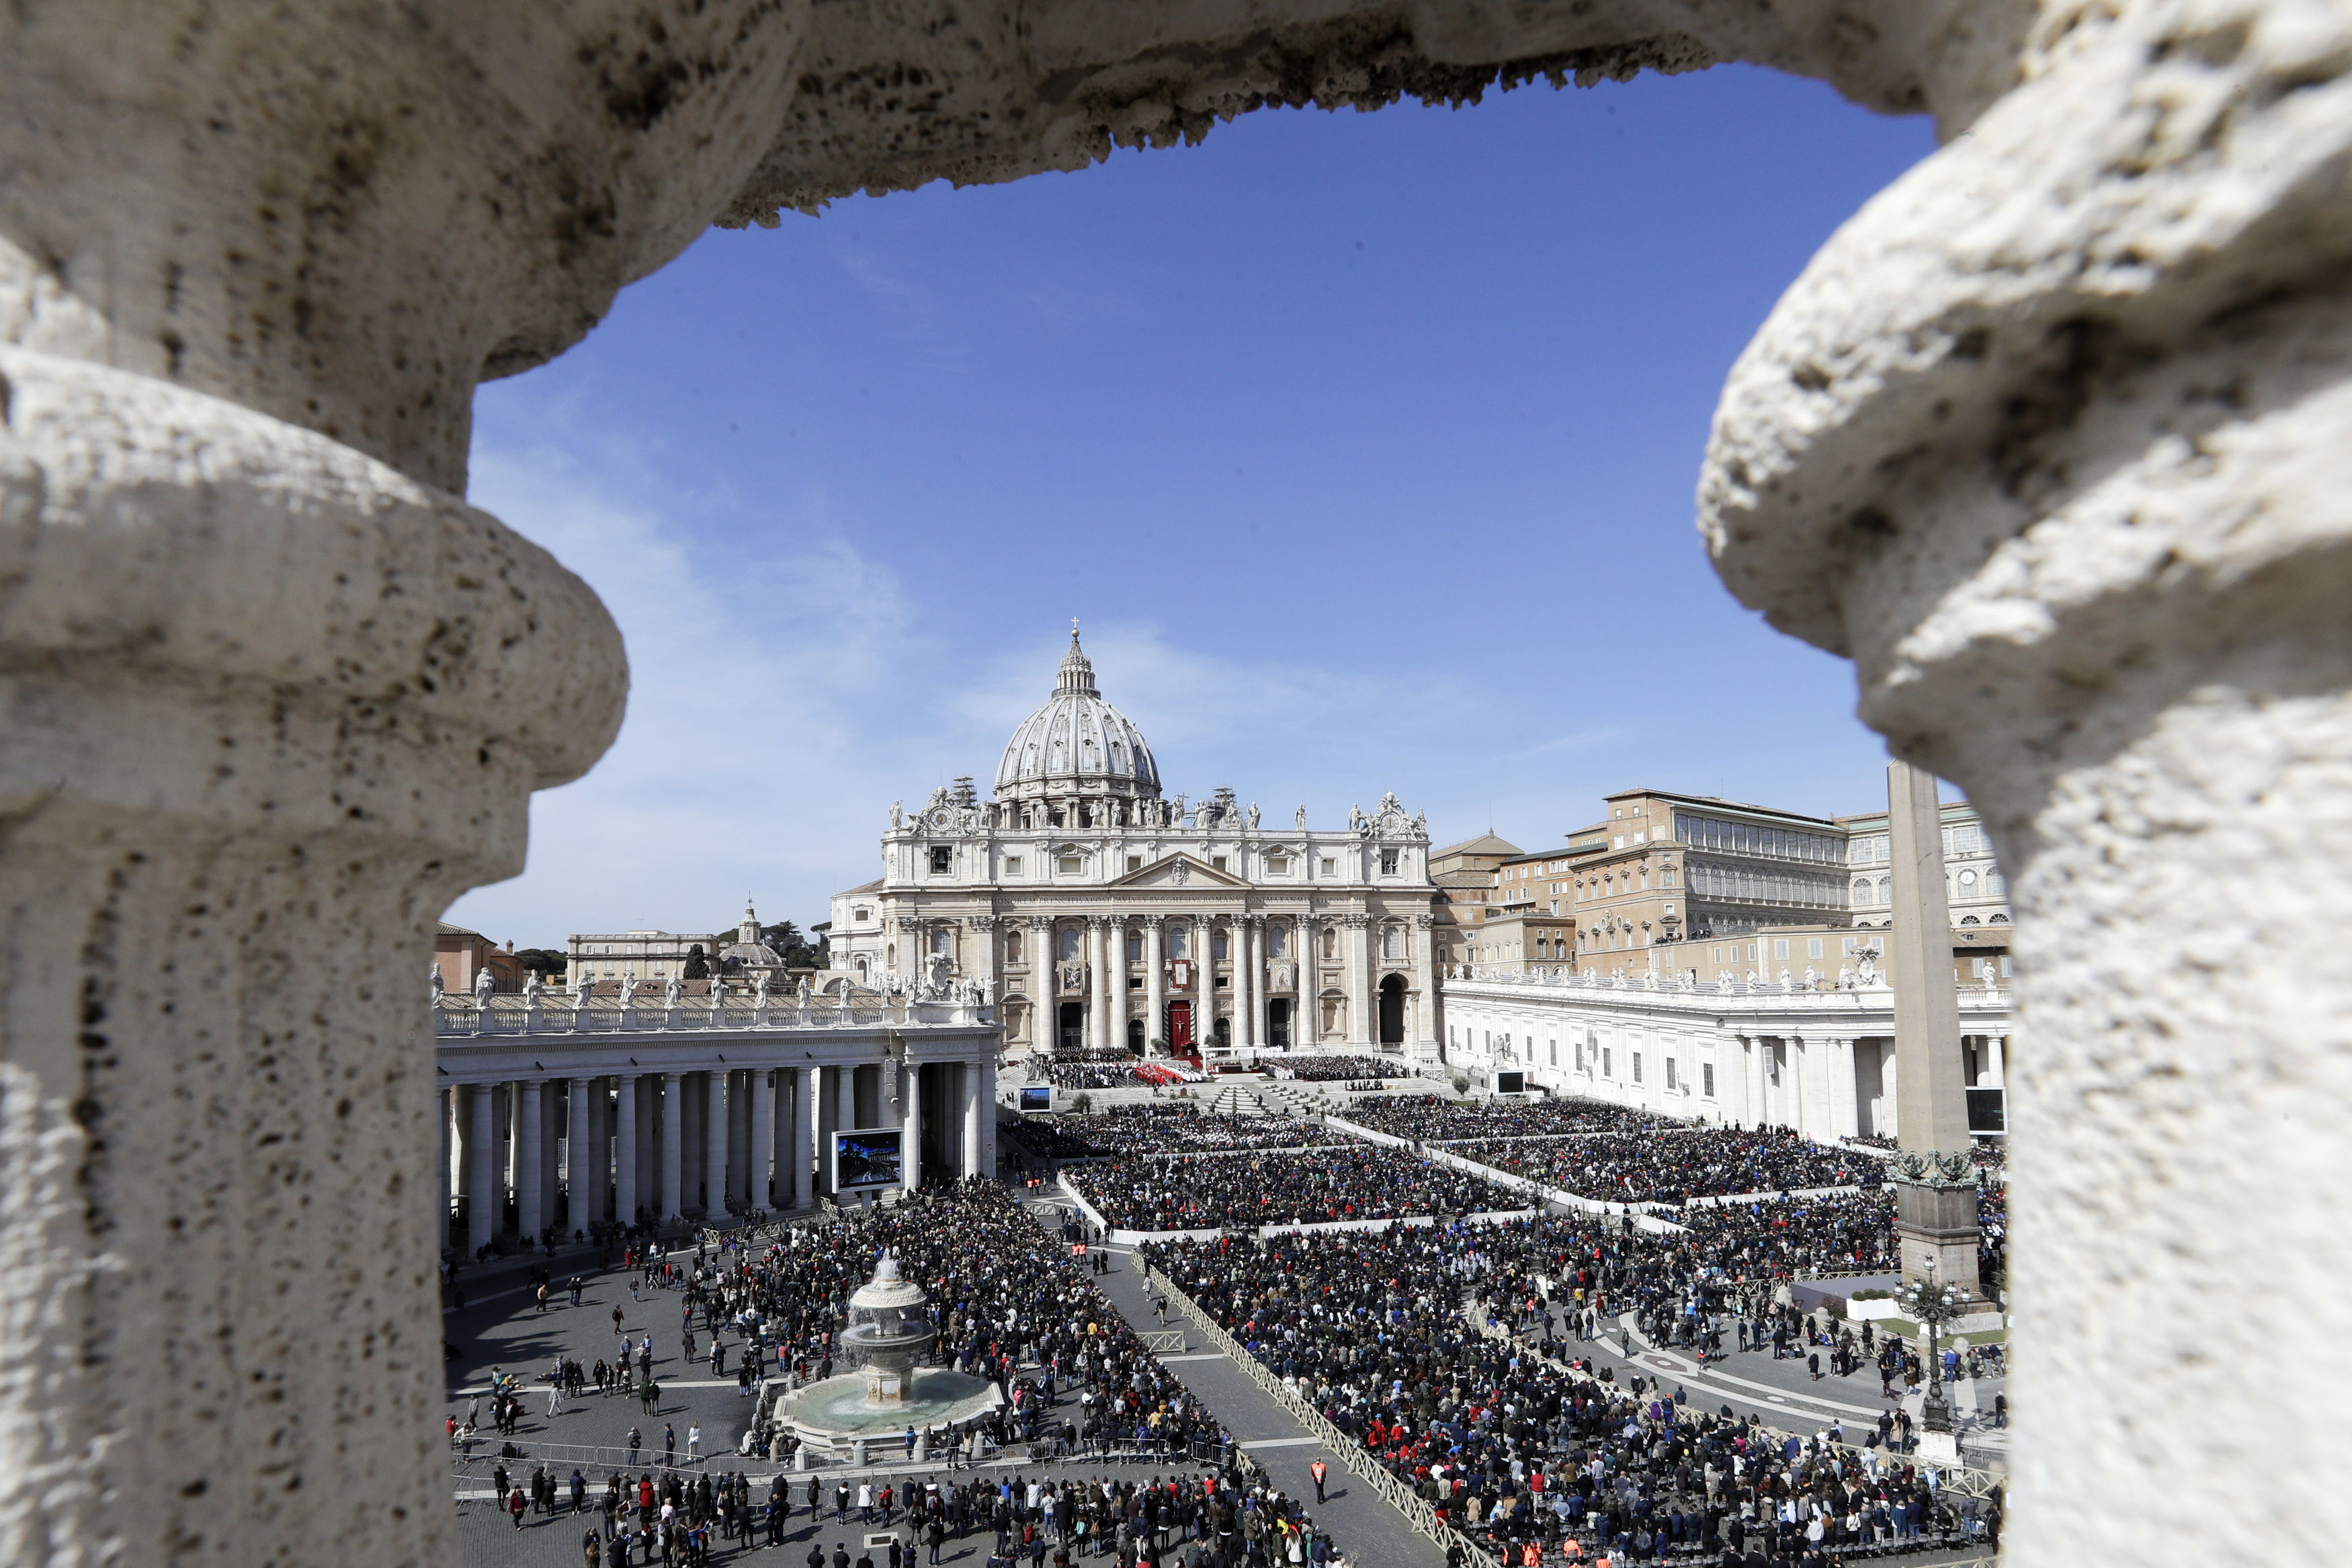 A view of St Peter's Square.